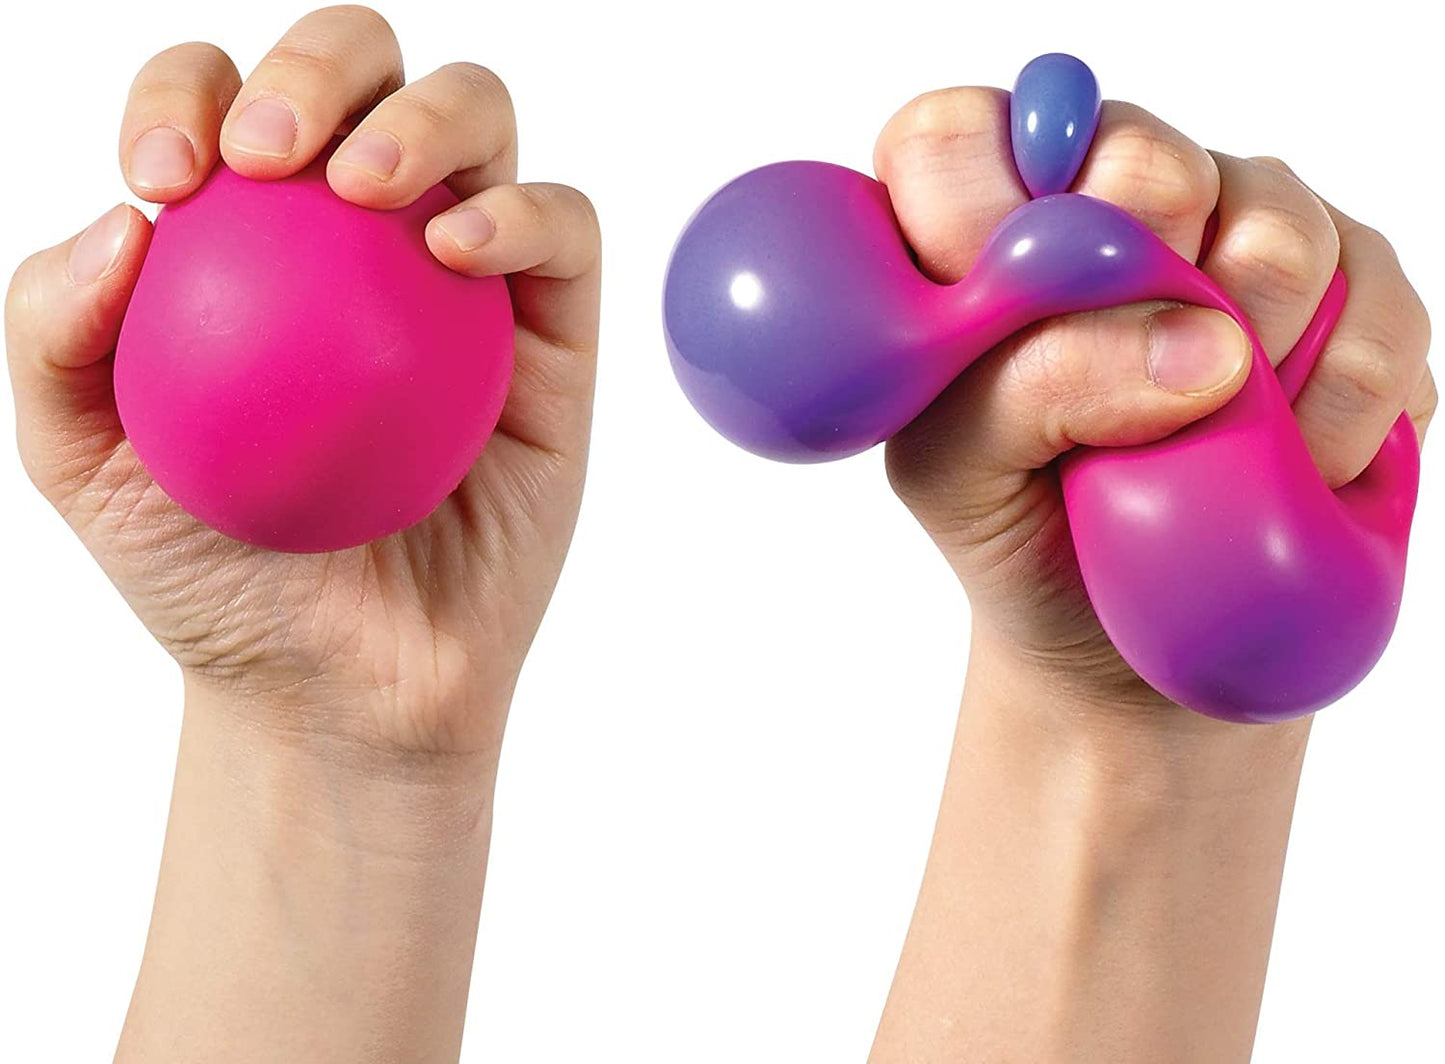 Nee Doh Stress Ball - Color Change Fidget Squishy Toy - One Random Pick On Color